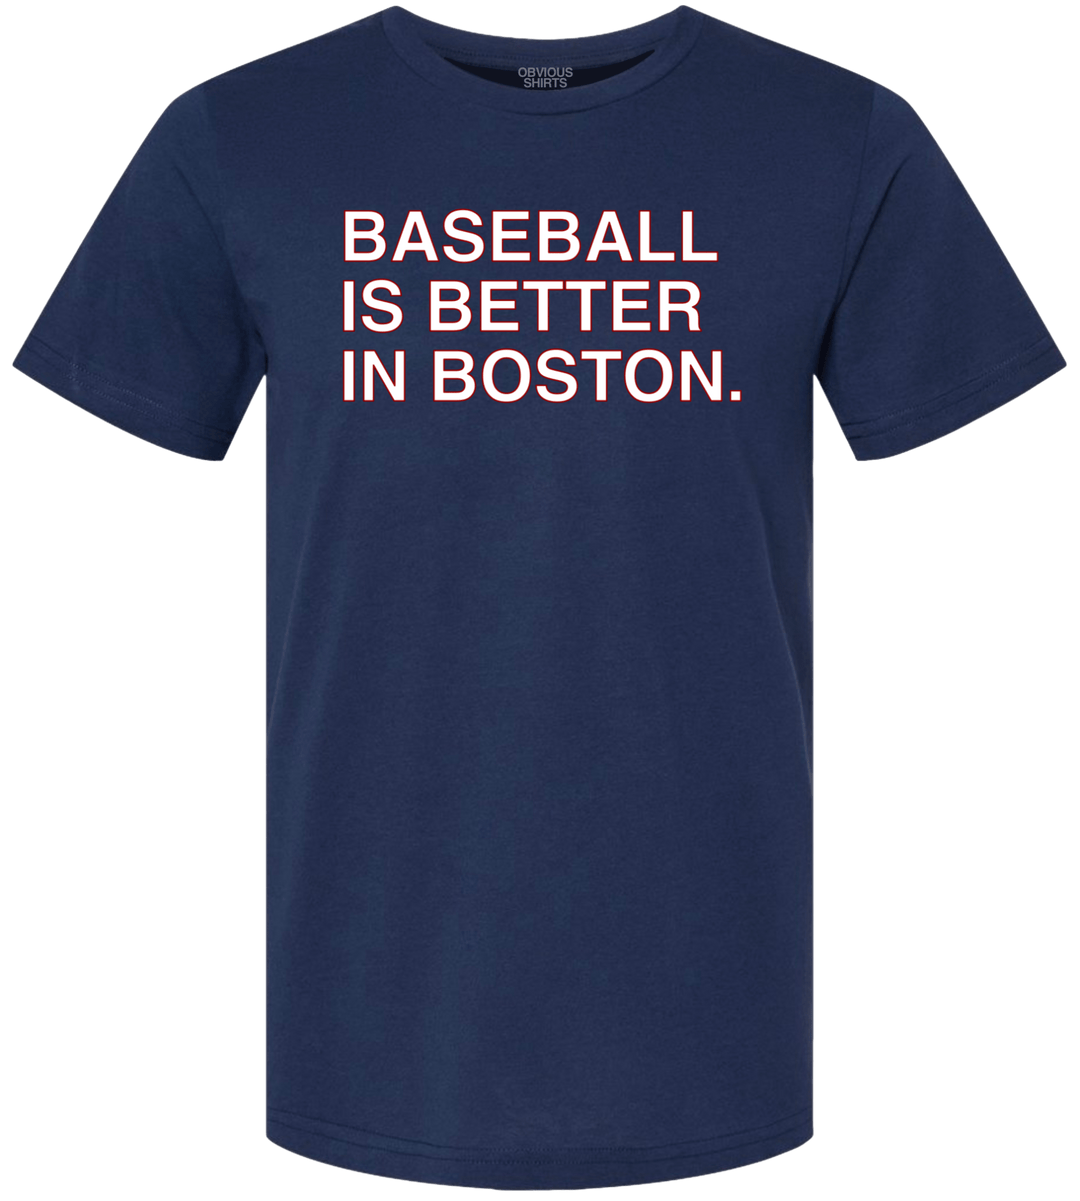 BASEBALL IS BETTER IN BOSTON. - OBVIOUS SHIRTS